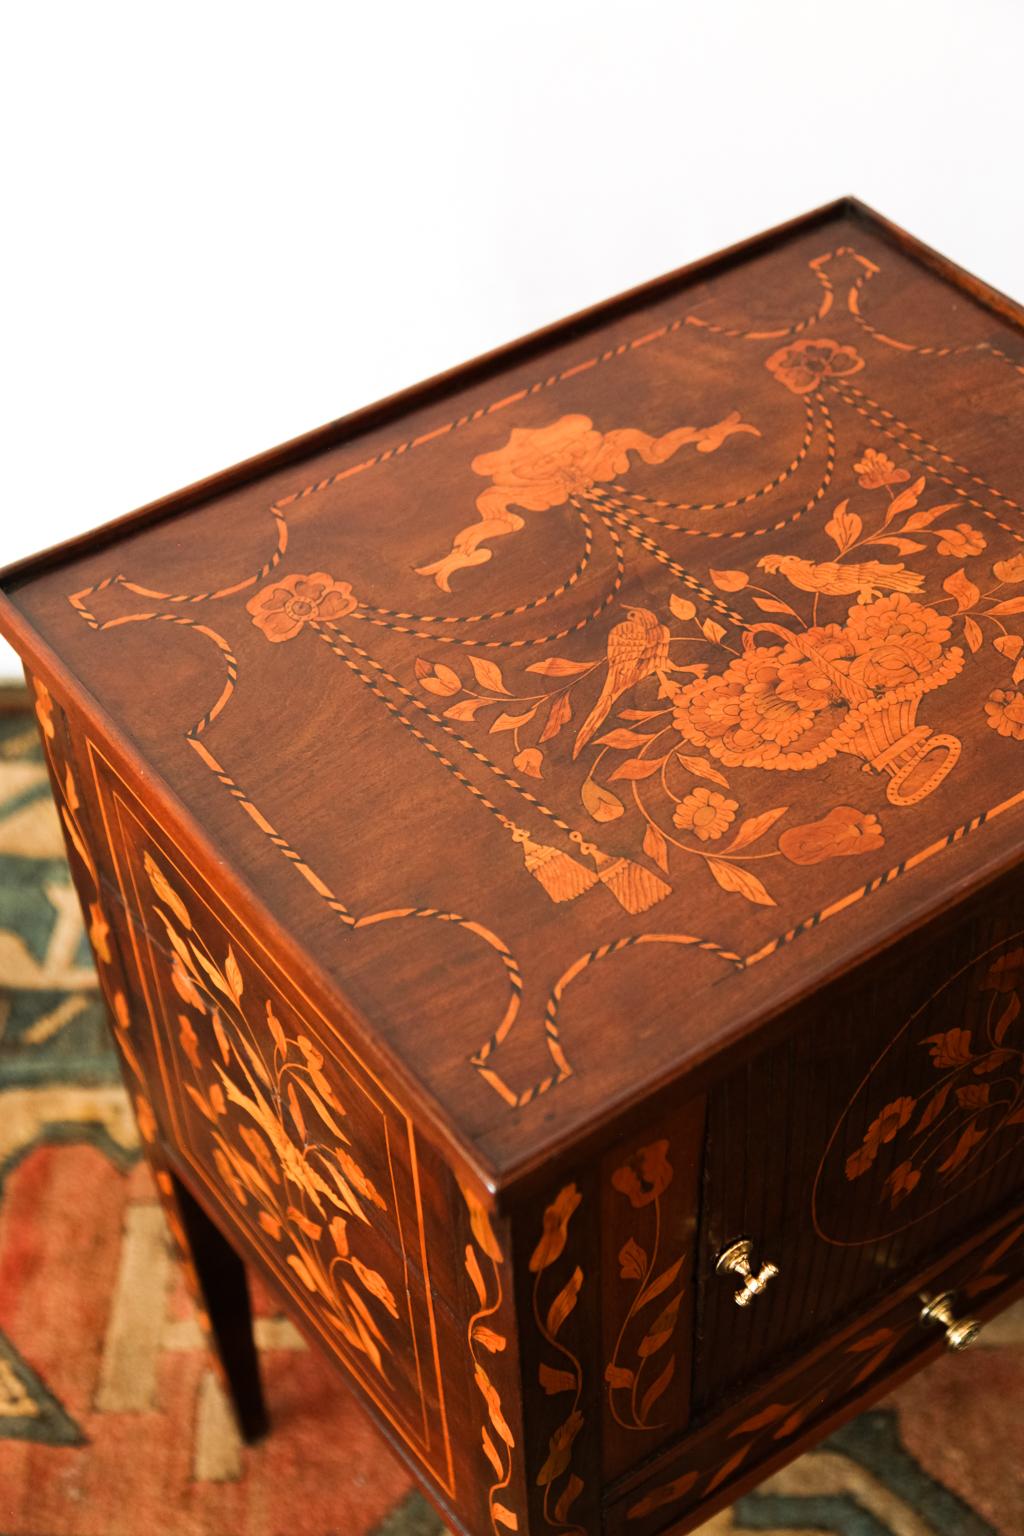 Inlaid marquetry one-drawer commode with boxwood and ebony inlay and baskets of flowers and birds. The wood is walnut and has inlaid rope swags terminating in tassels. The door is simulated tambour, but is solid.